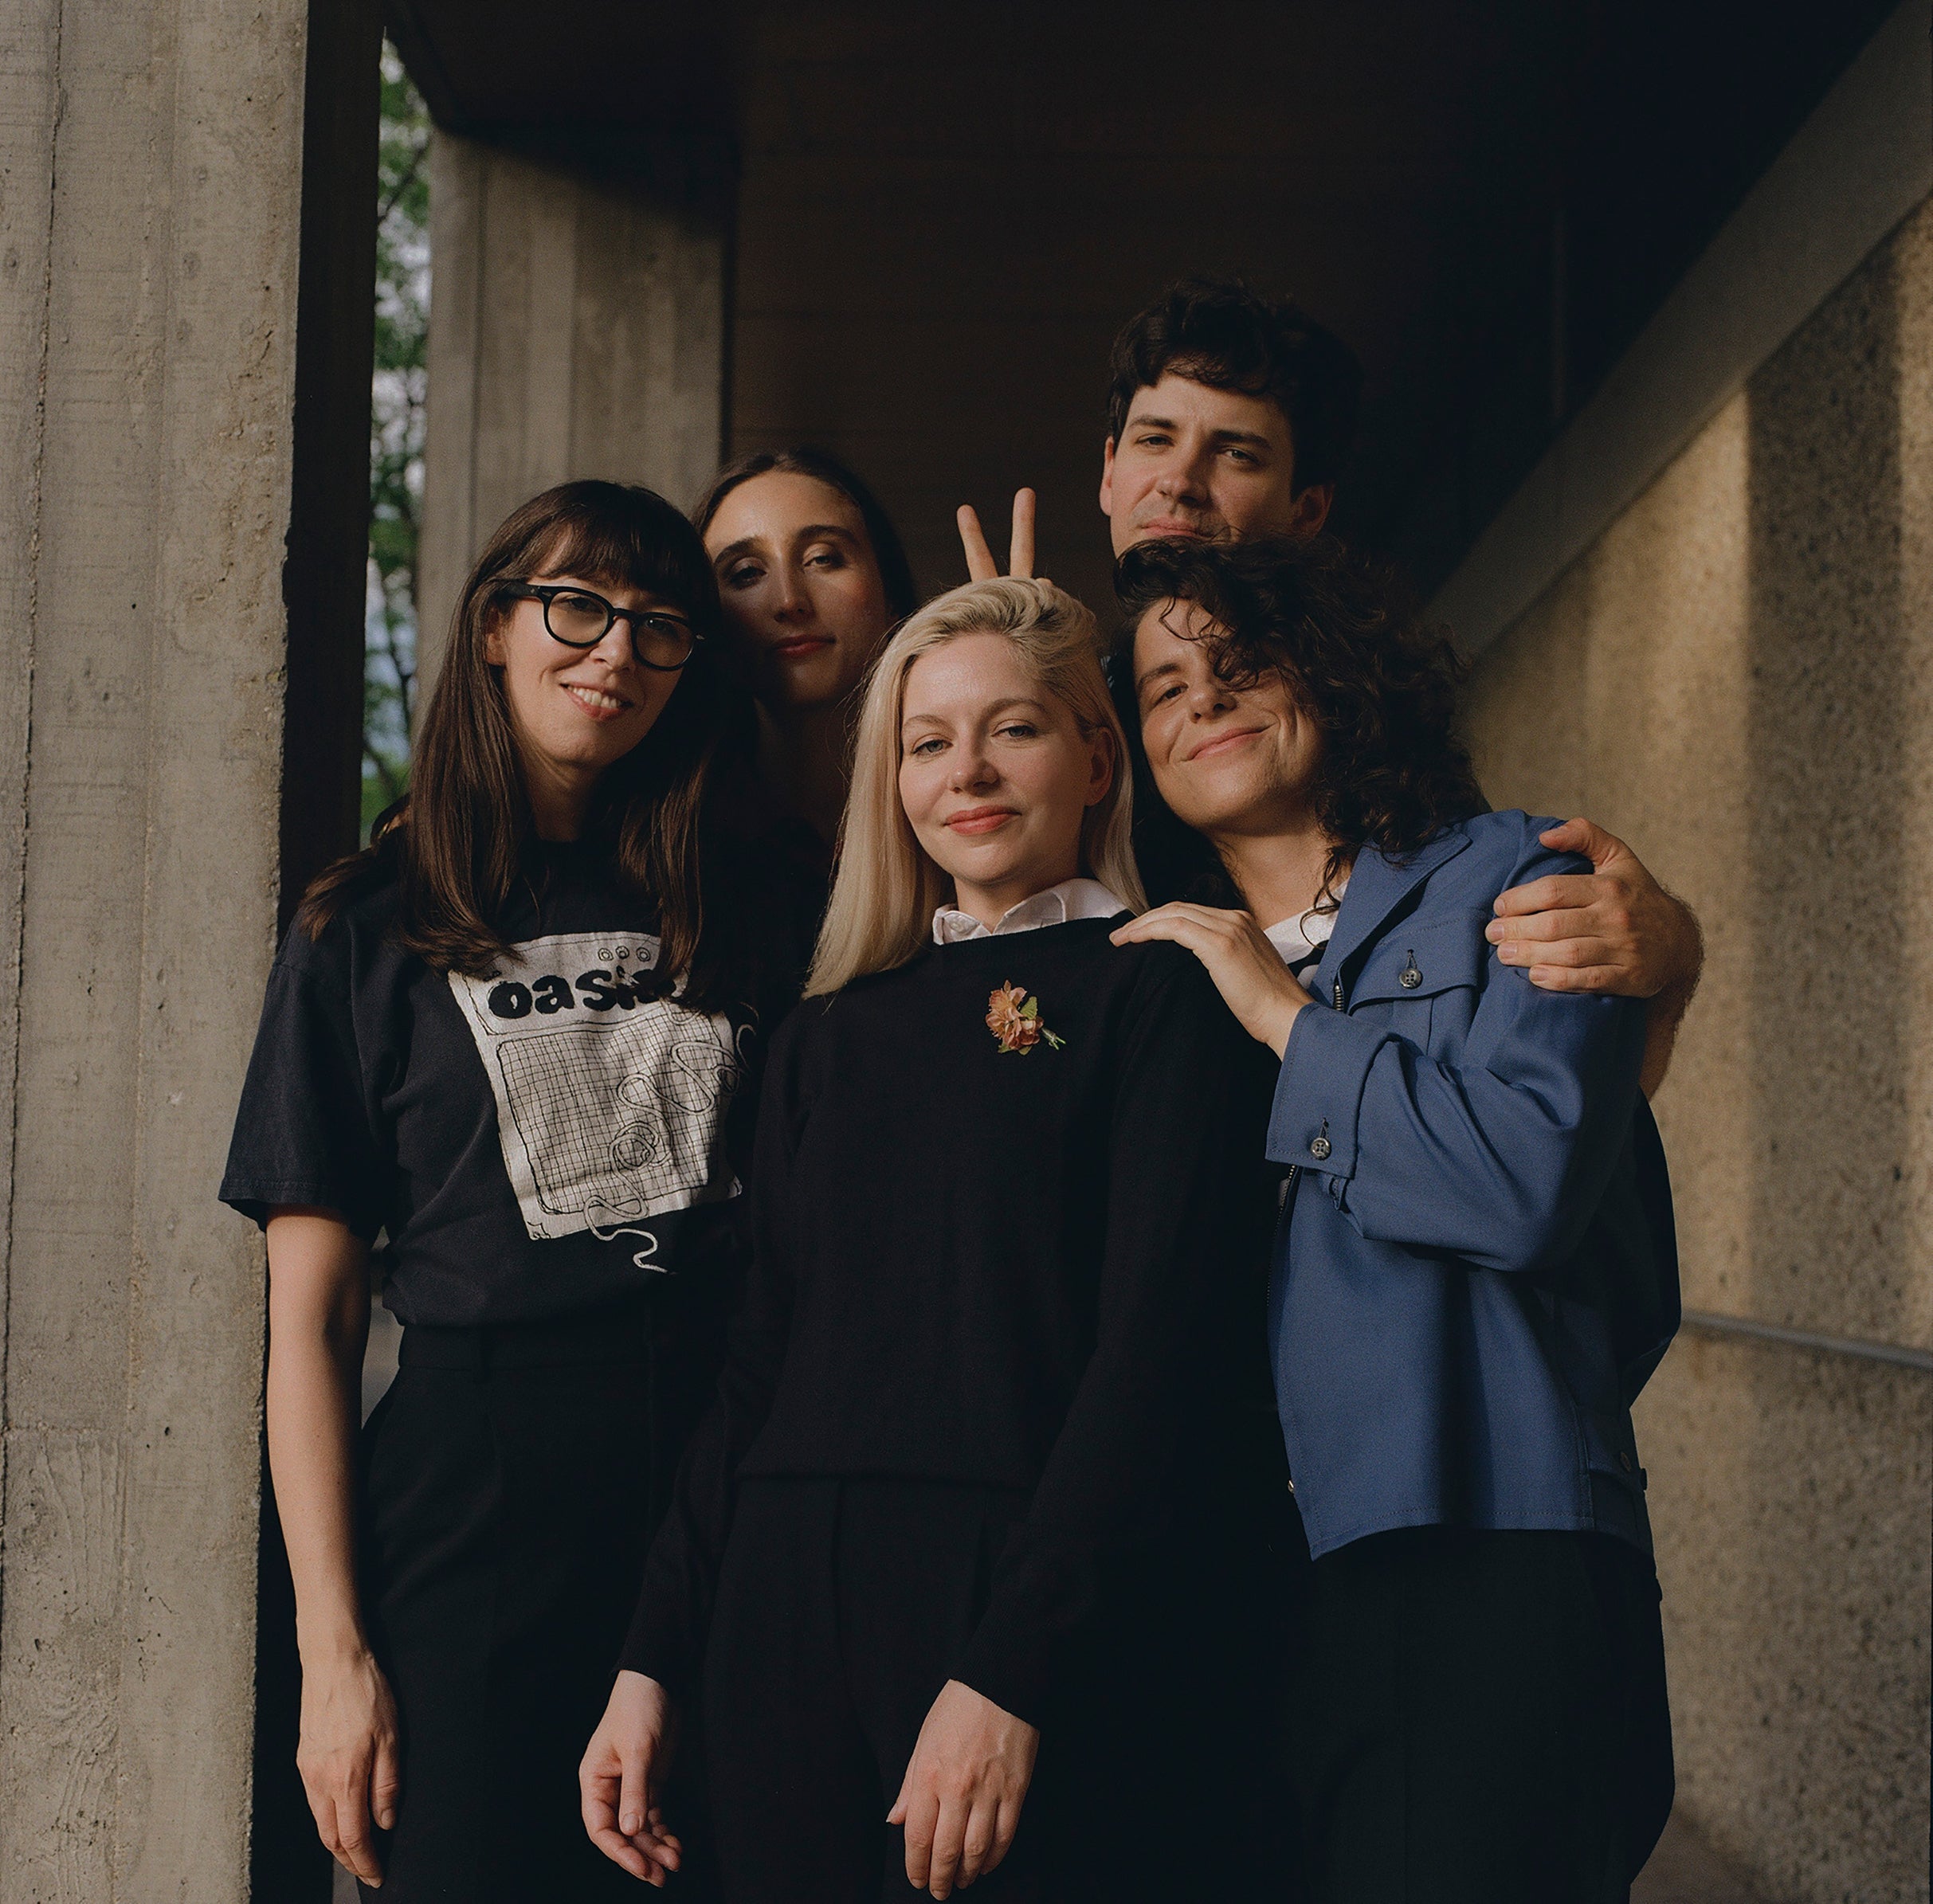 working presale password for Alvvays with special guest cootie catcher tickets in Toronto at The Concert Hall